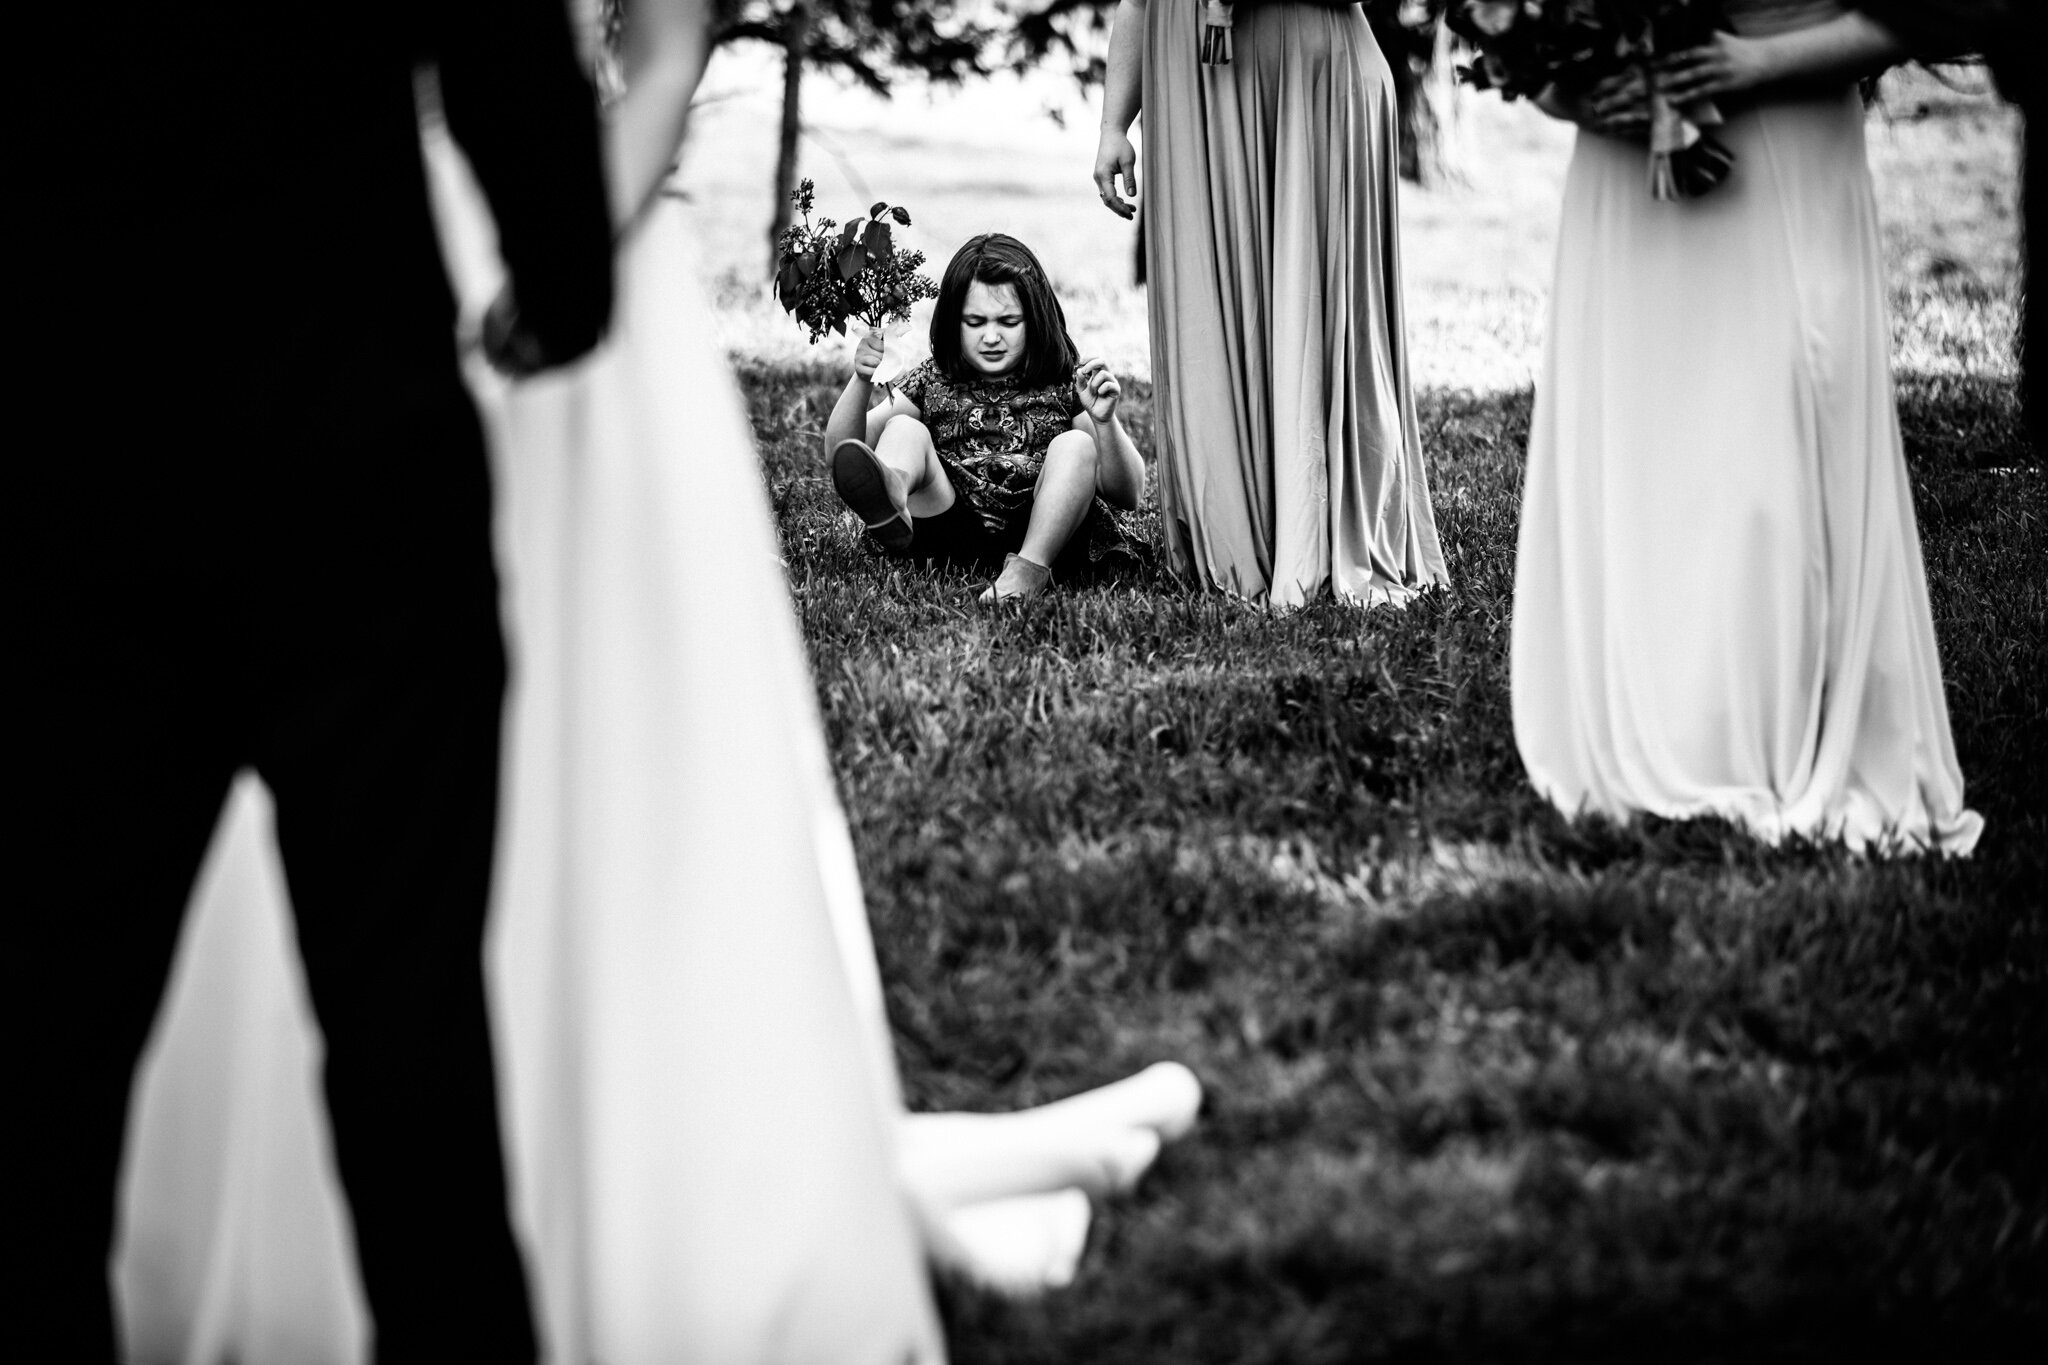 016-ROCKSTEADY IMAGES [Tracy+Anthony Wedding (Squarespace)]-ROQ40251.jpg